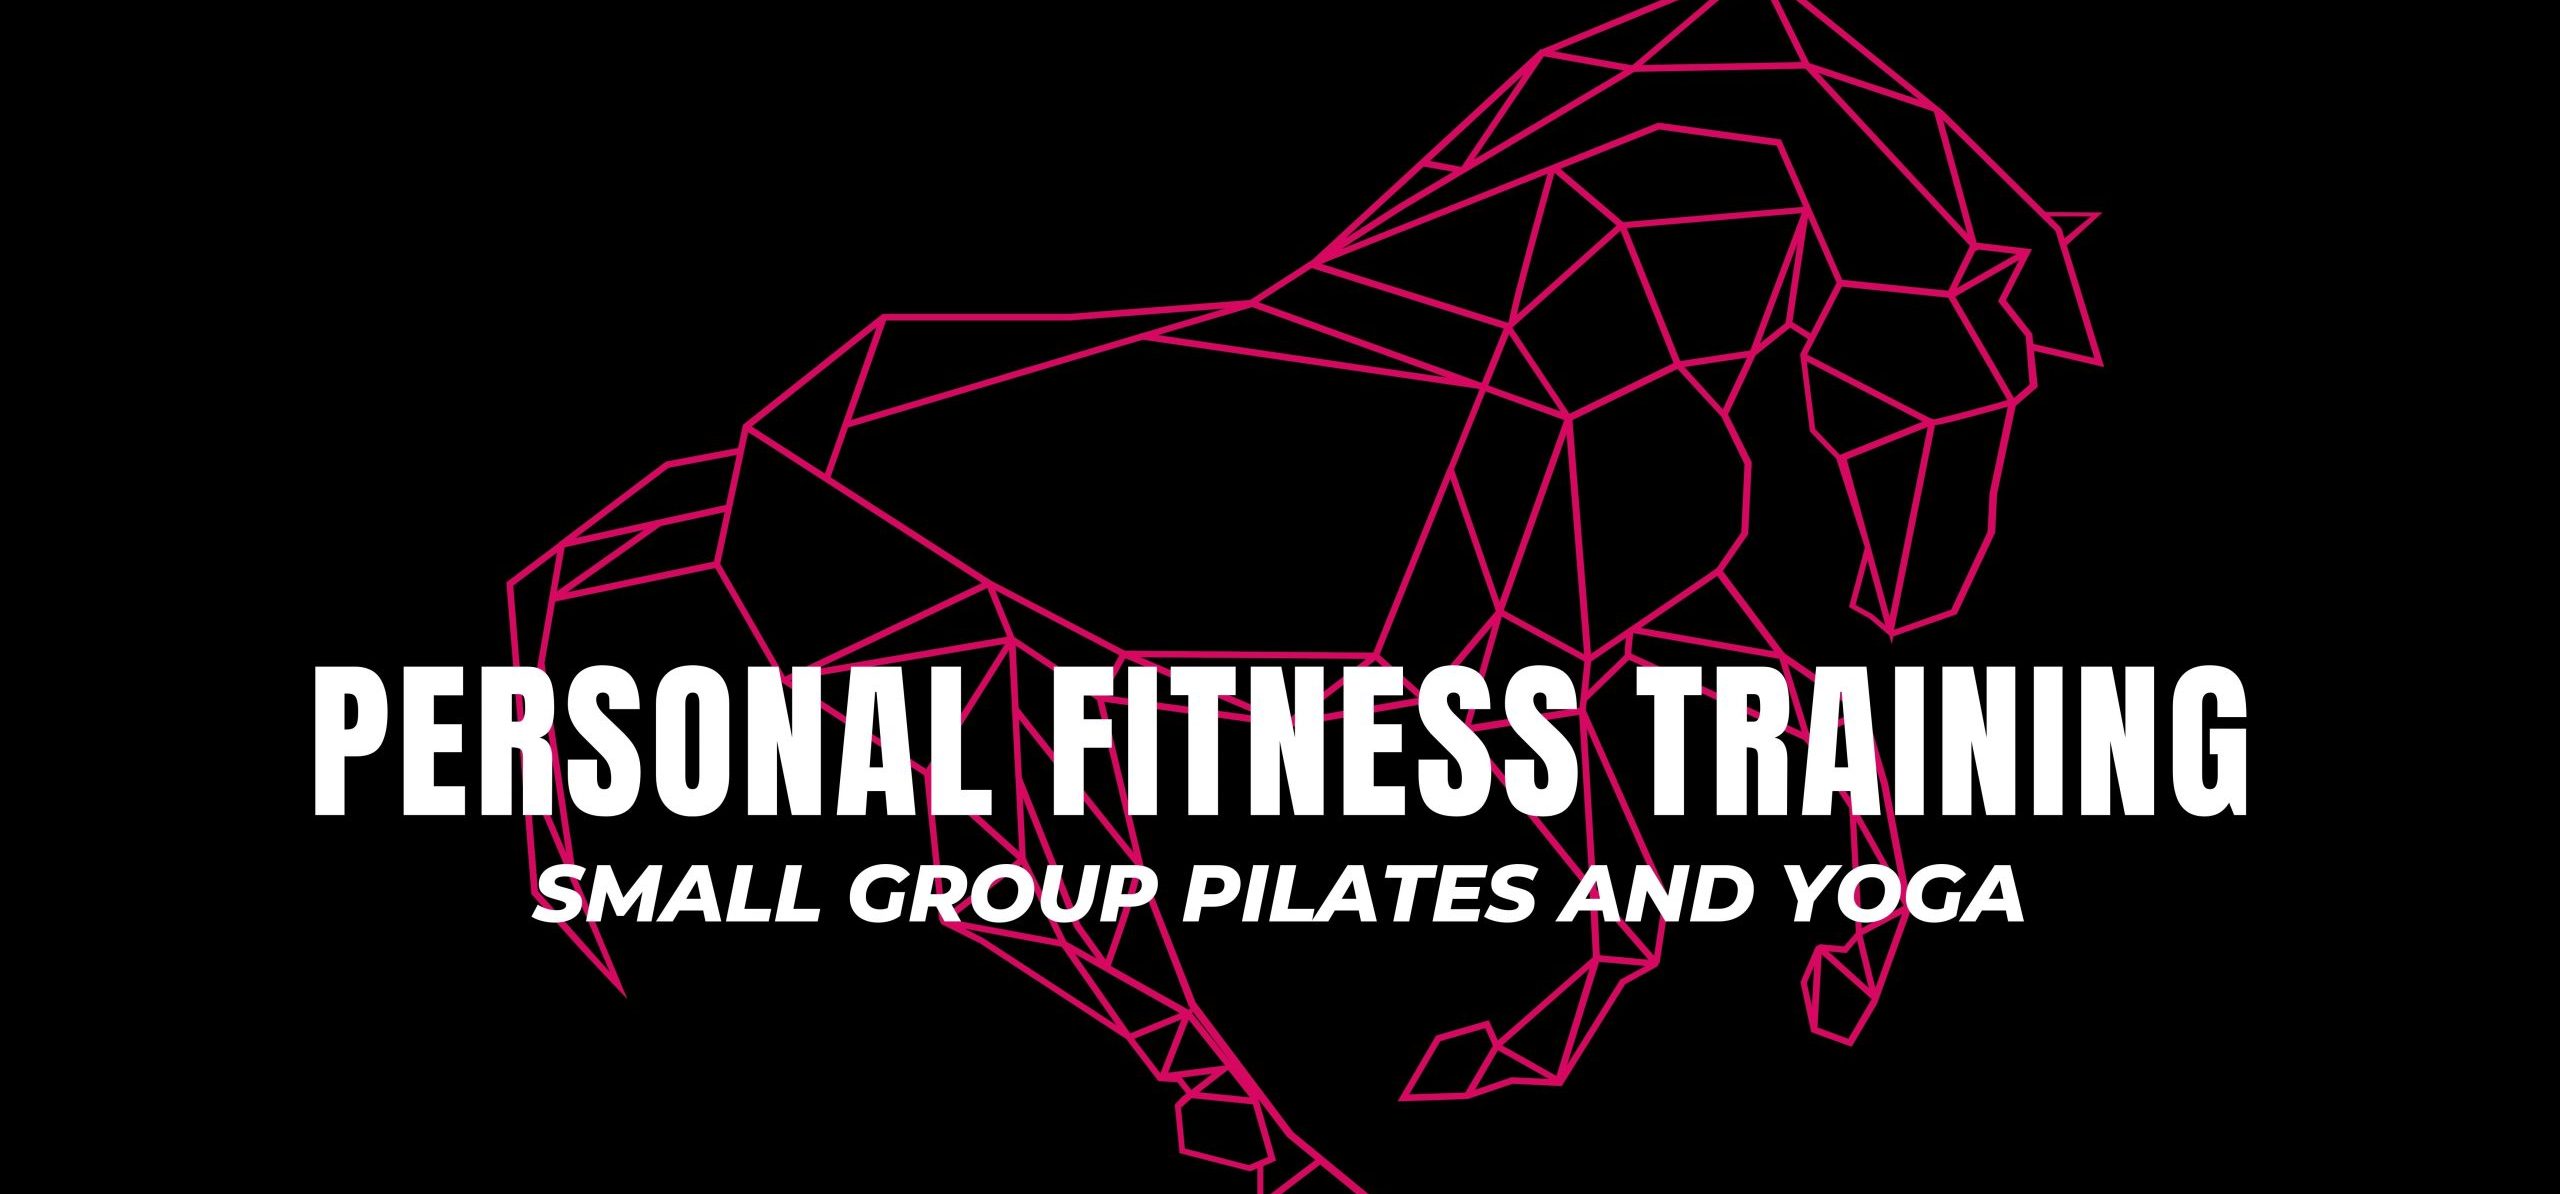 Personal Fitness Training, Small Group Pilates And Yoga